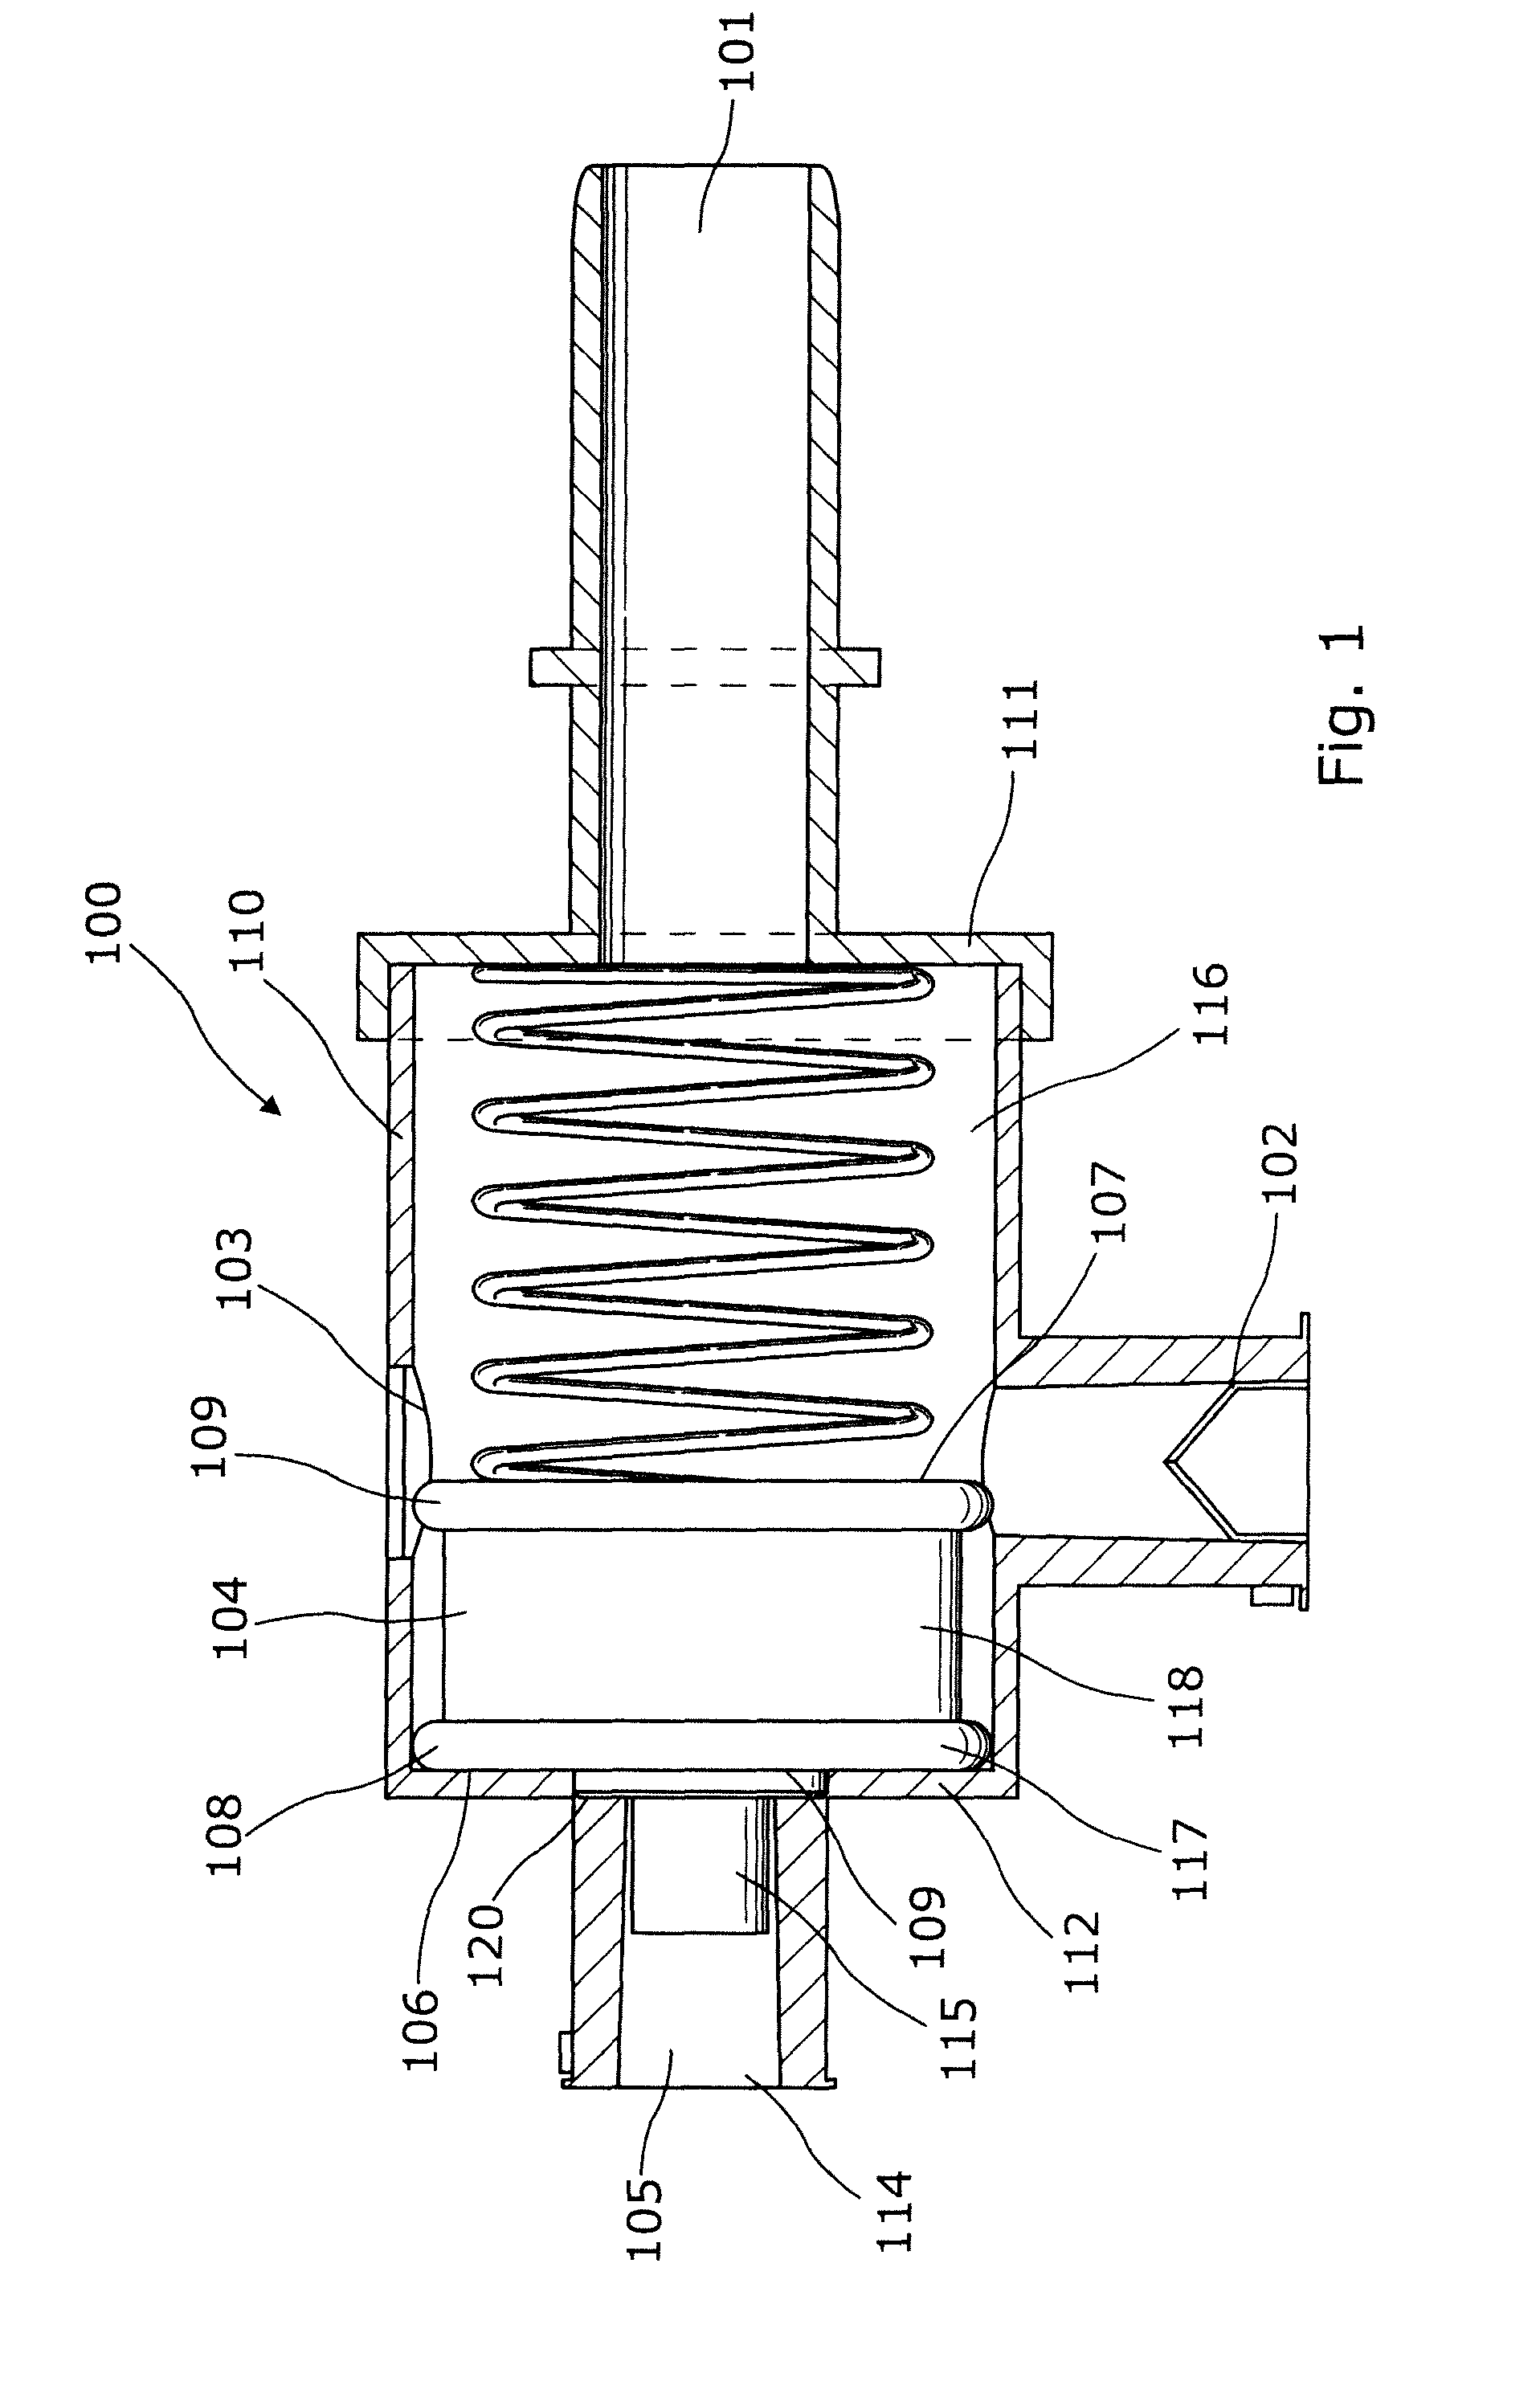 Valve system for inflatable medical device